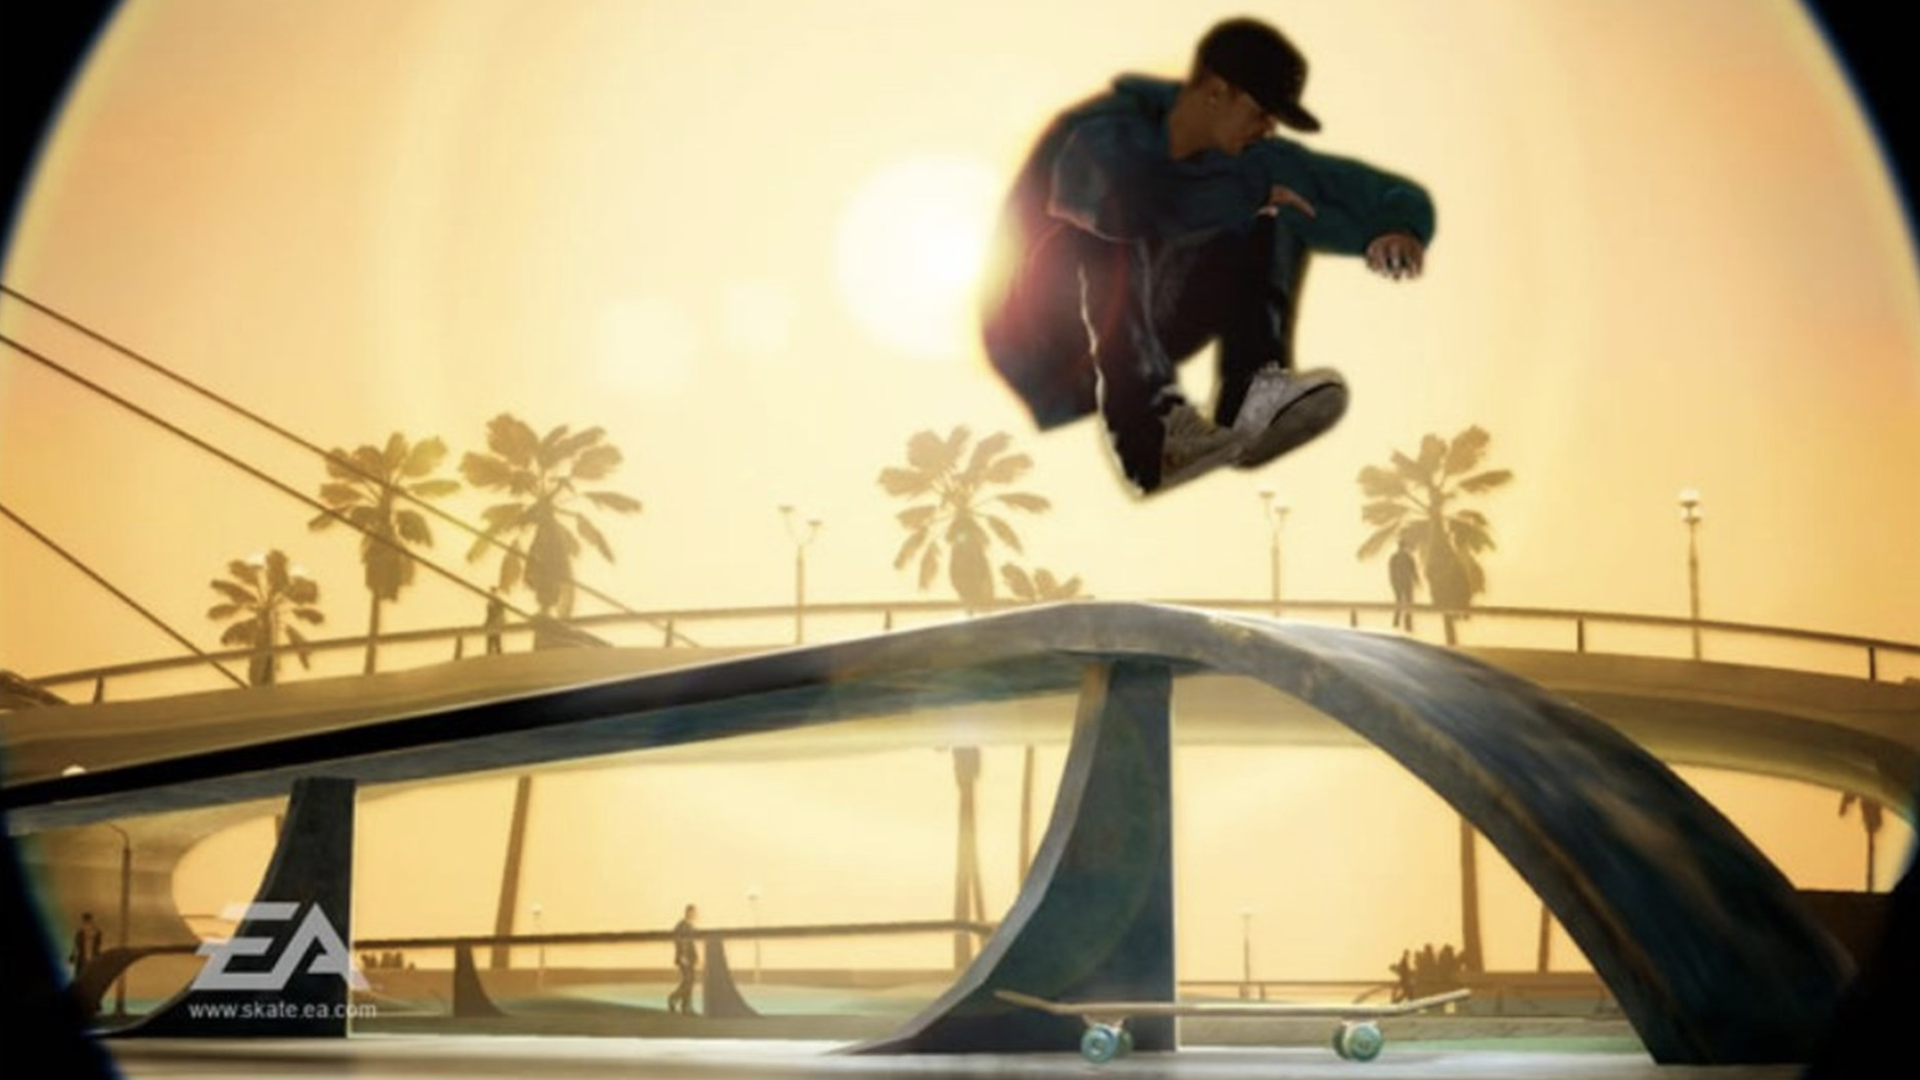 How to Get Skate 2 on Xbox One?